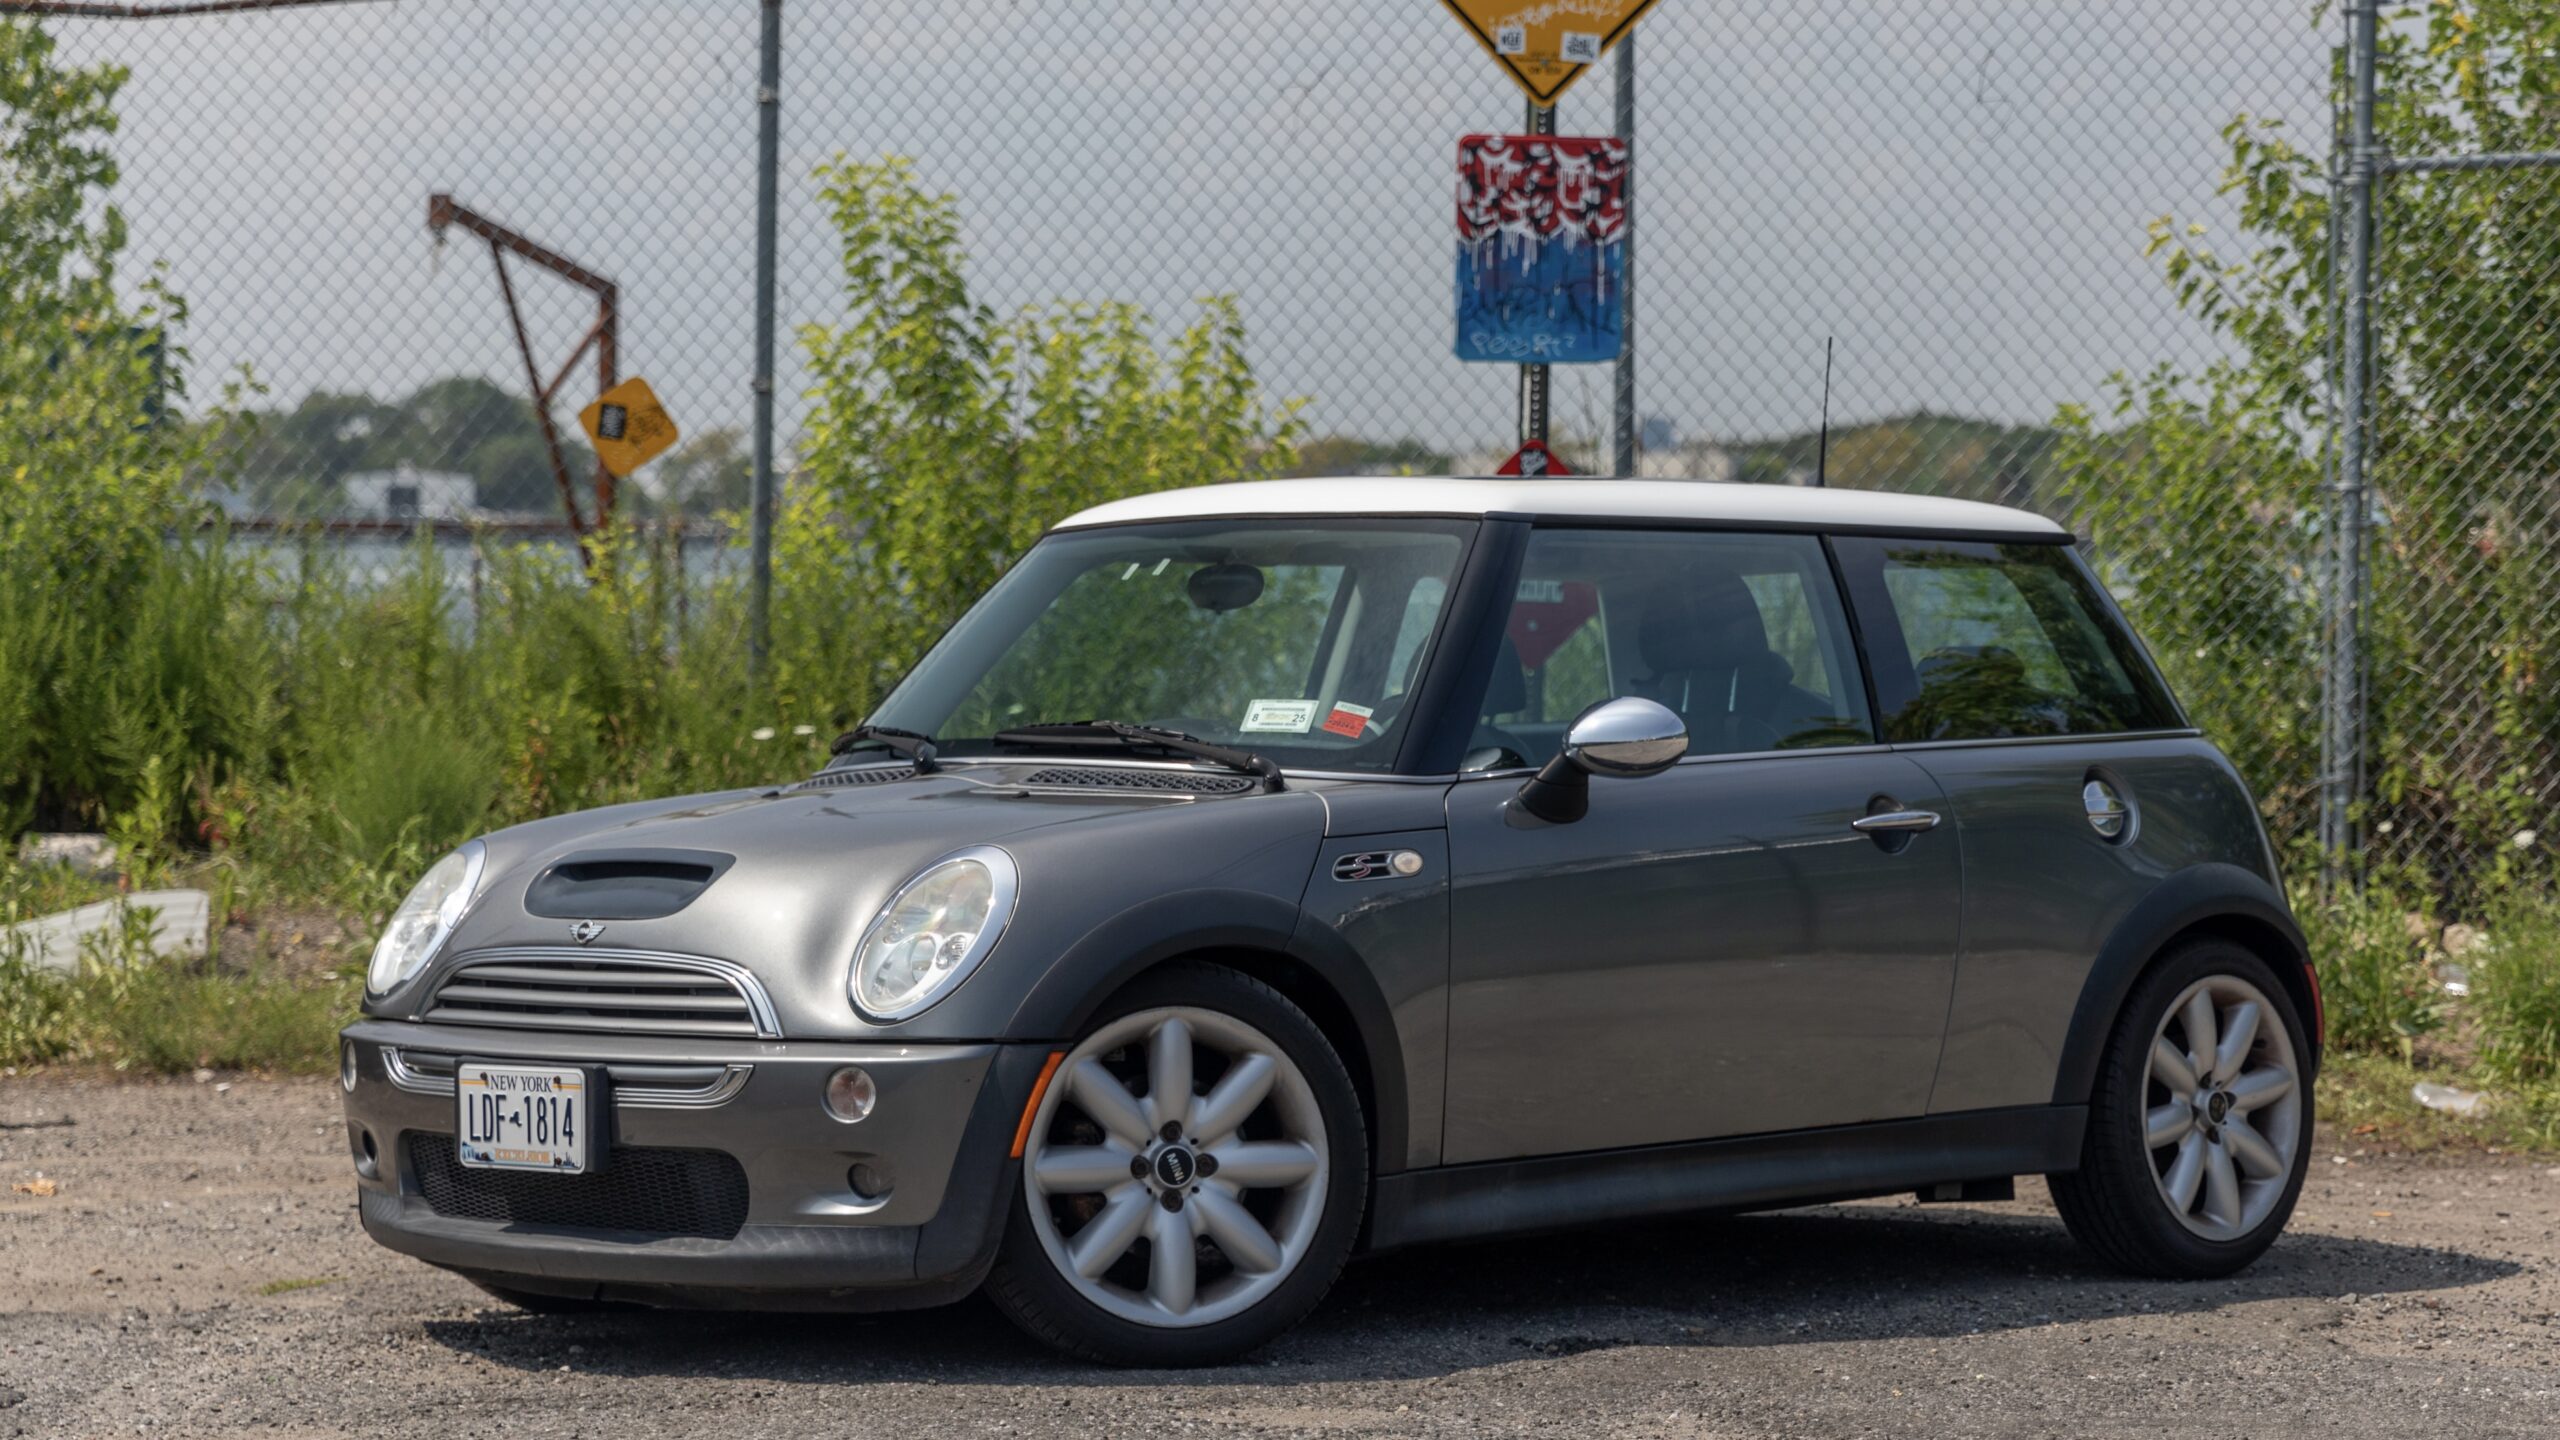 I Bought a Cheap R53 Mini Cooper S to Fulfill My Supercharged Hot